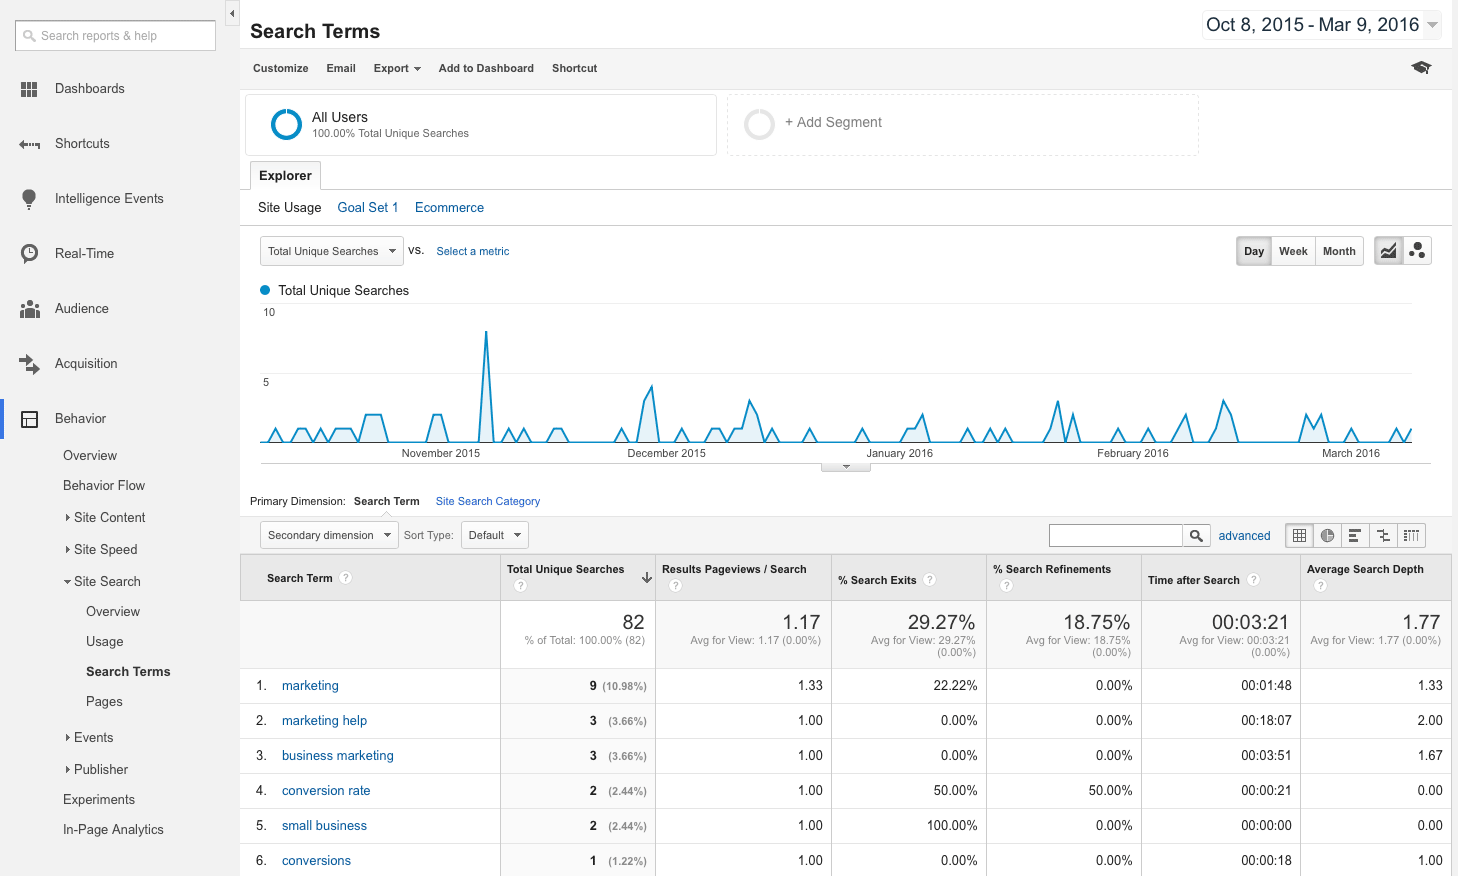 Search Terms report